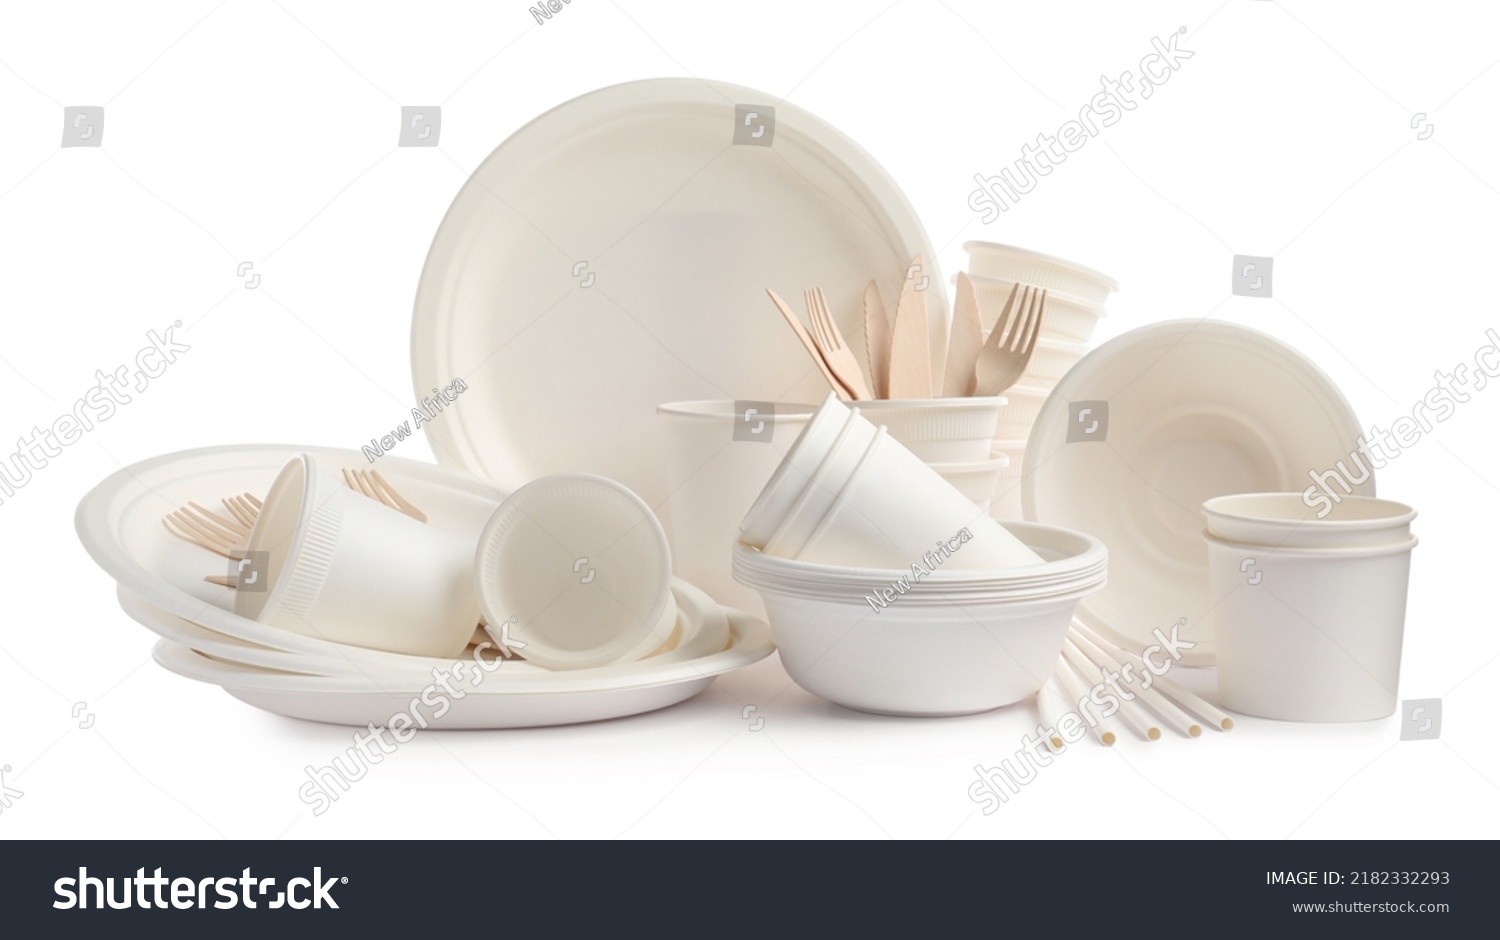 Set of disposable tableware on white background #2182332293